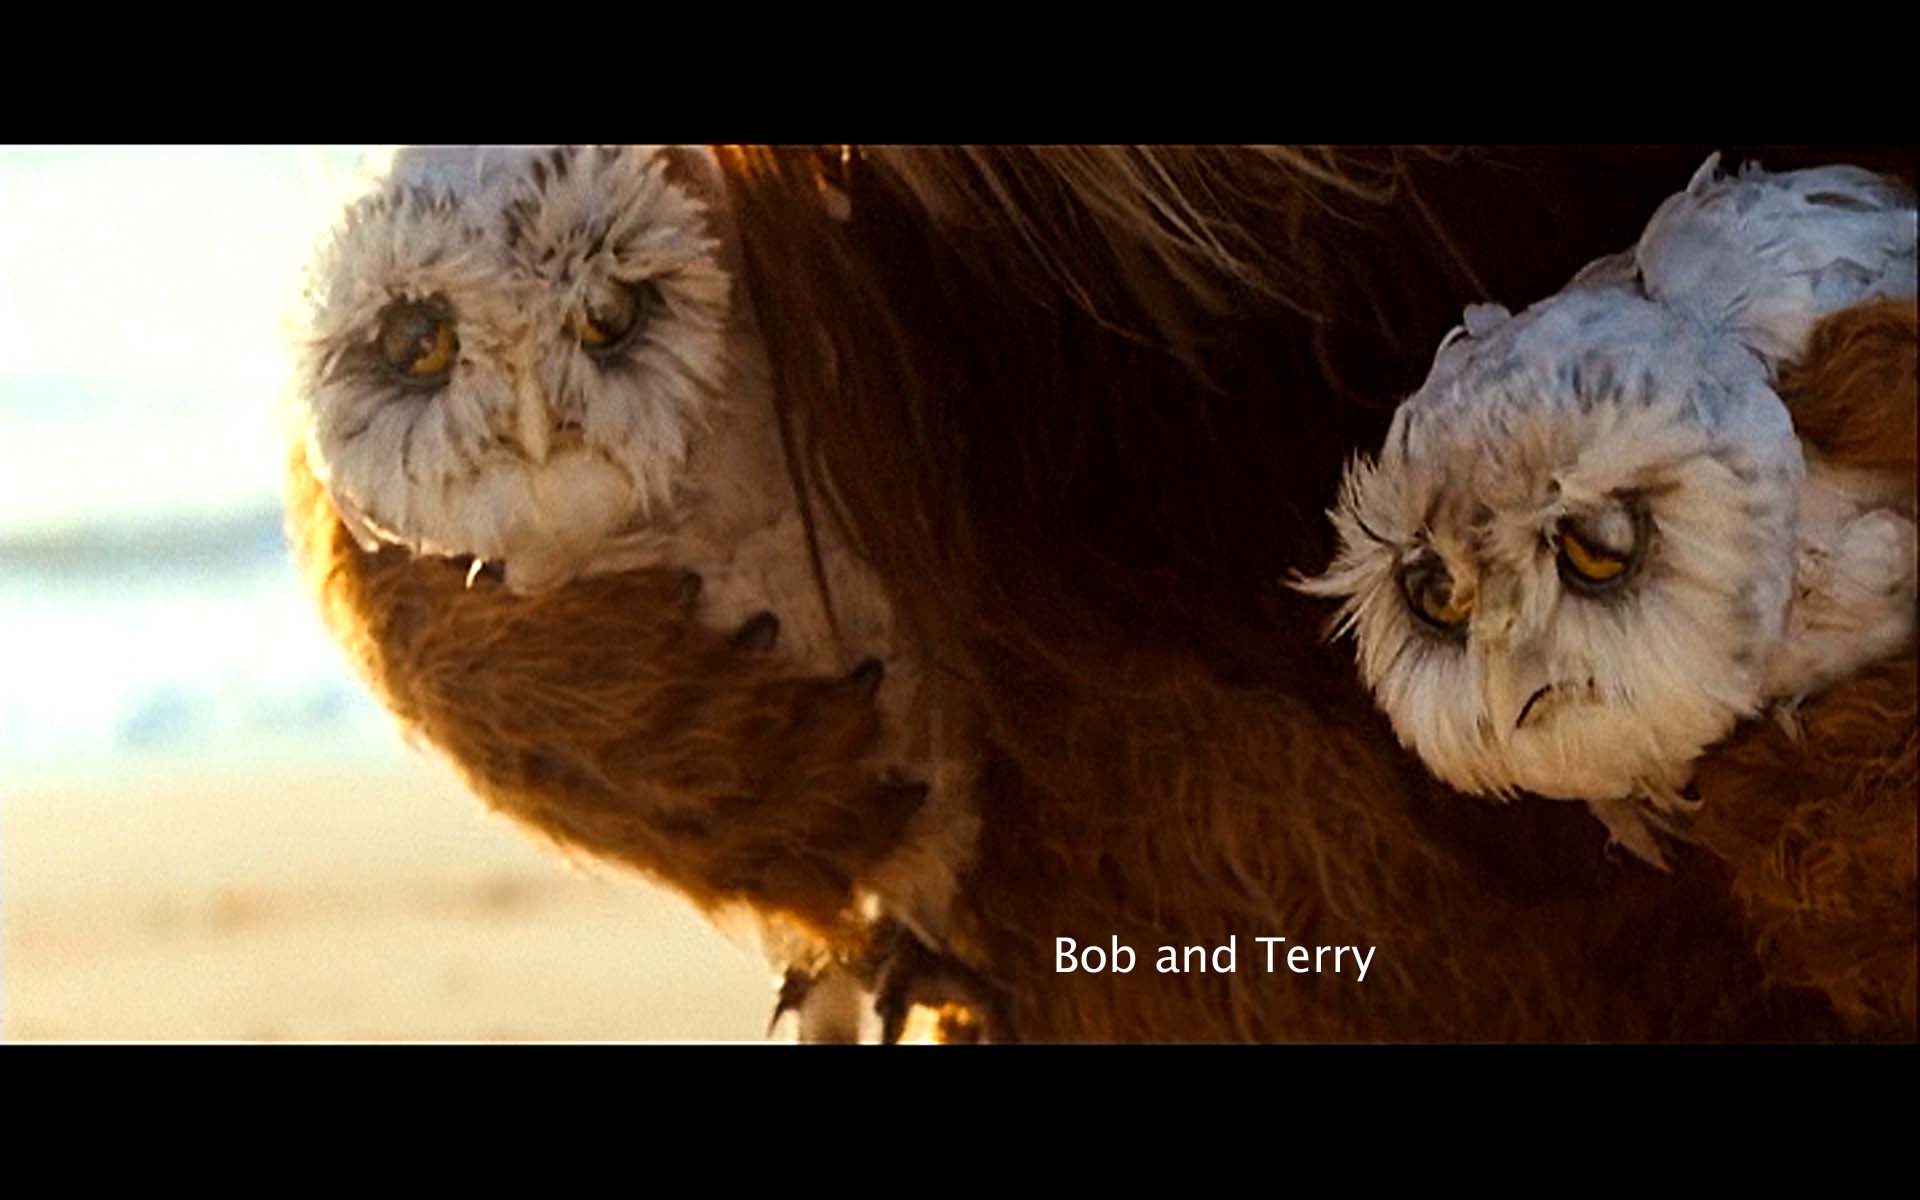 Bob and Terry